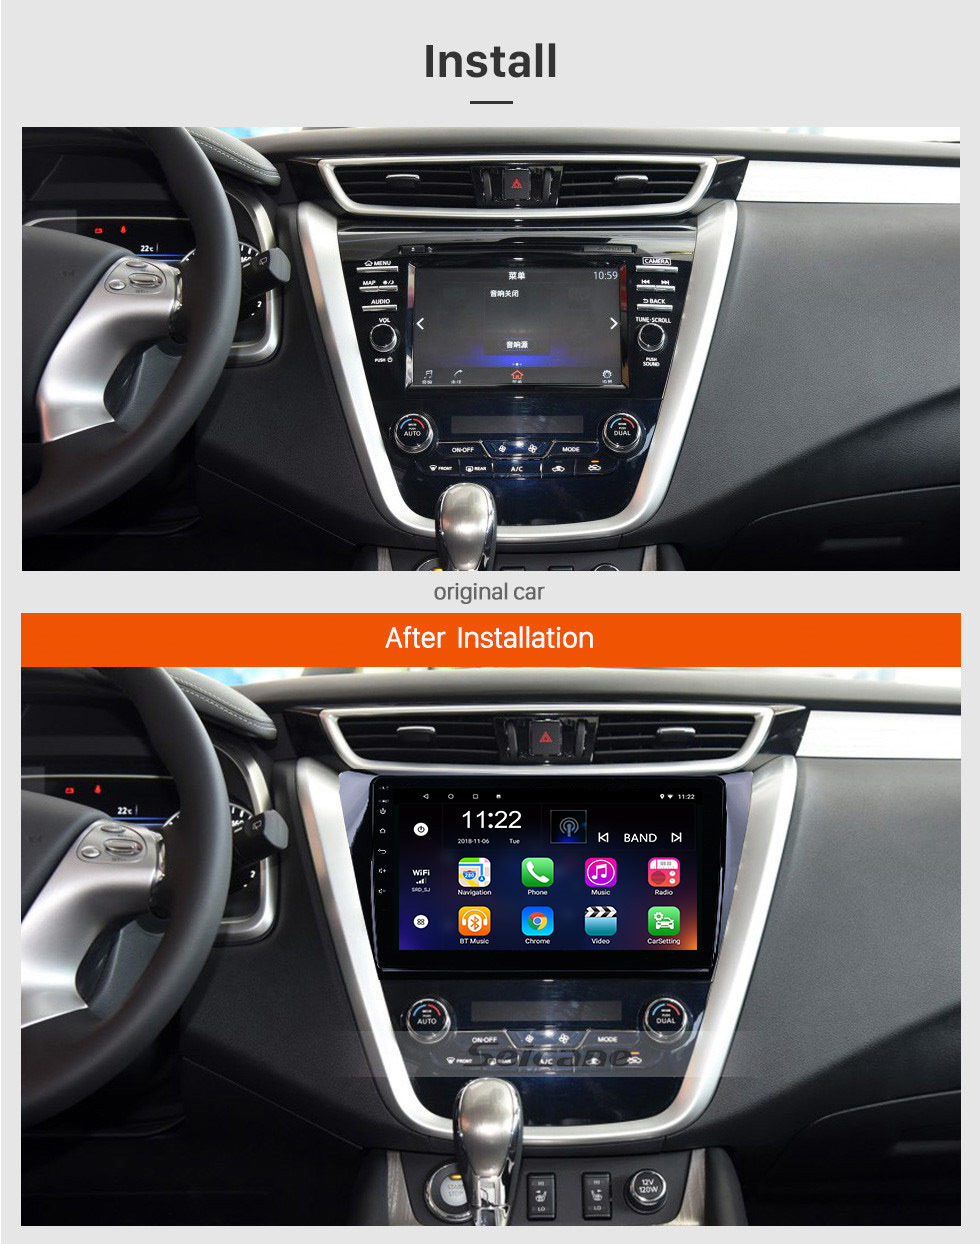 Seicane 10.1 inch HD 1024*600 Touchscreen 2015 2016 2017 Nissan Murano Android 10.0 GPS Navigation System With OBDII Rear Camera AUX Steering Wheel Control USB 1080P 3G WiFi Capacitive Mirror Link TPMS DVR Bluetooth